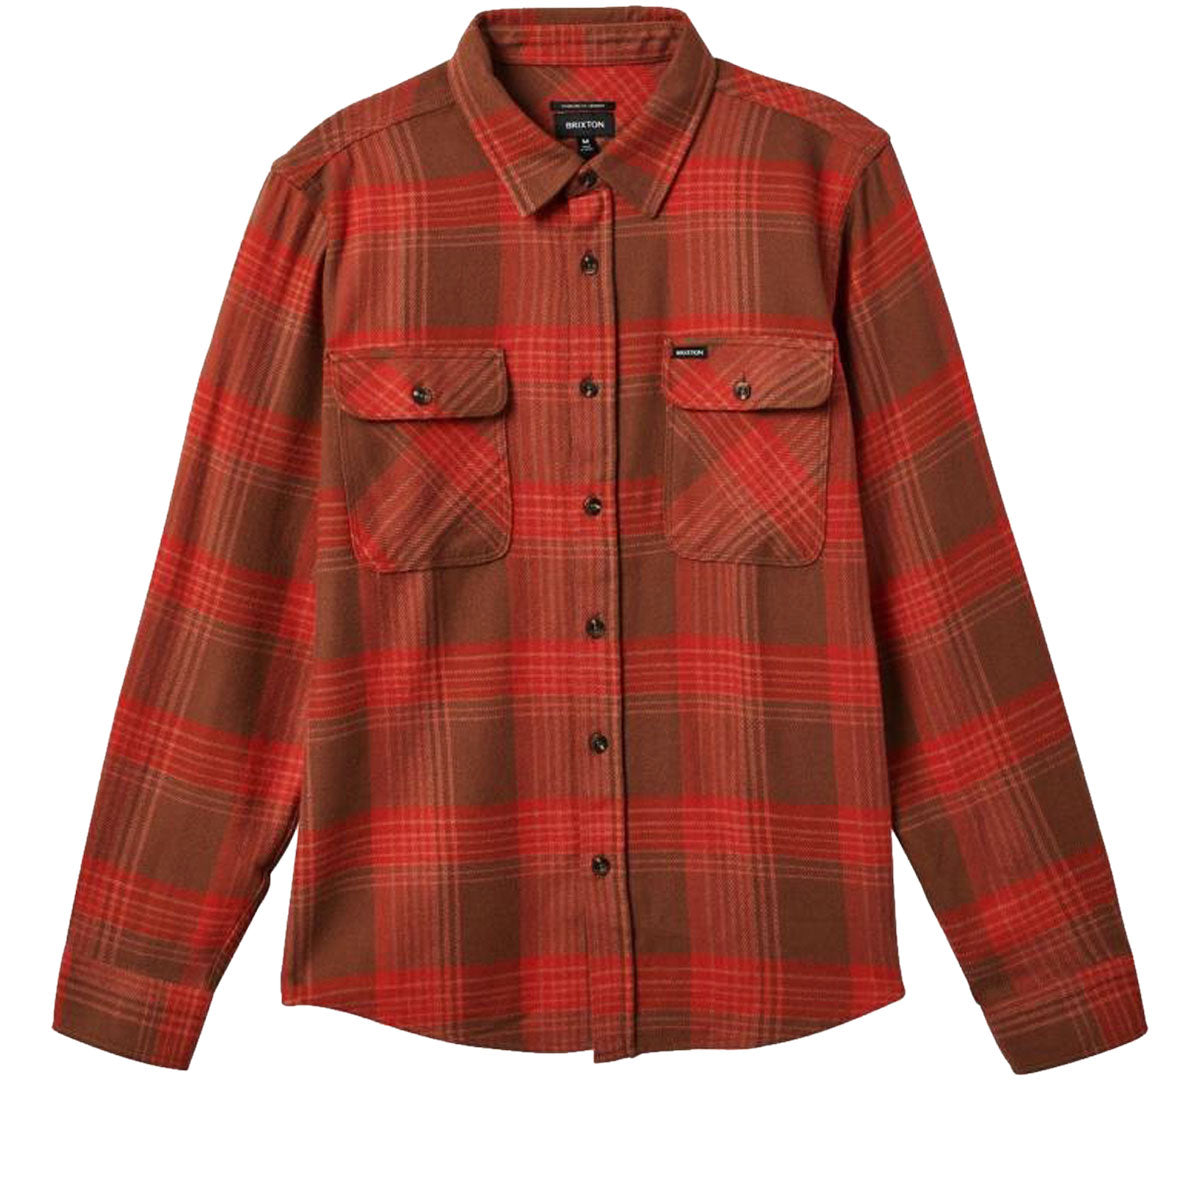 Brixton Bowery Flannel long Sleeve Shirt - Barn Red/Bison image 1